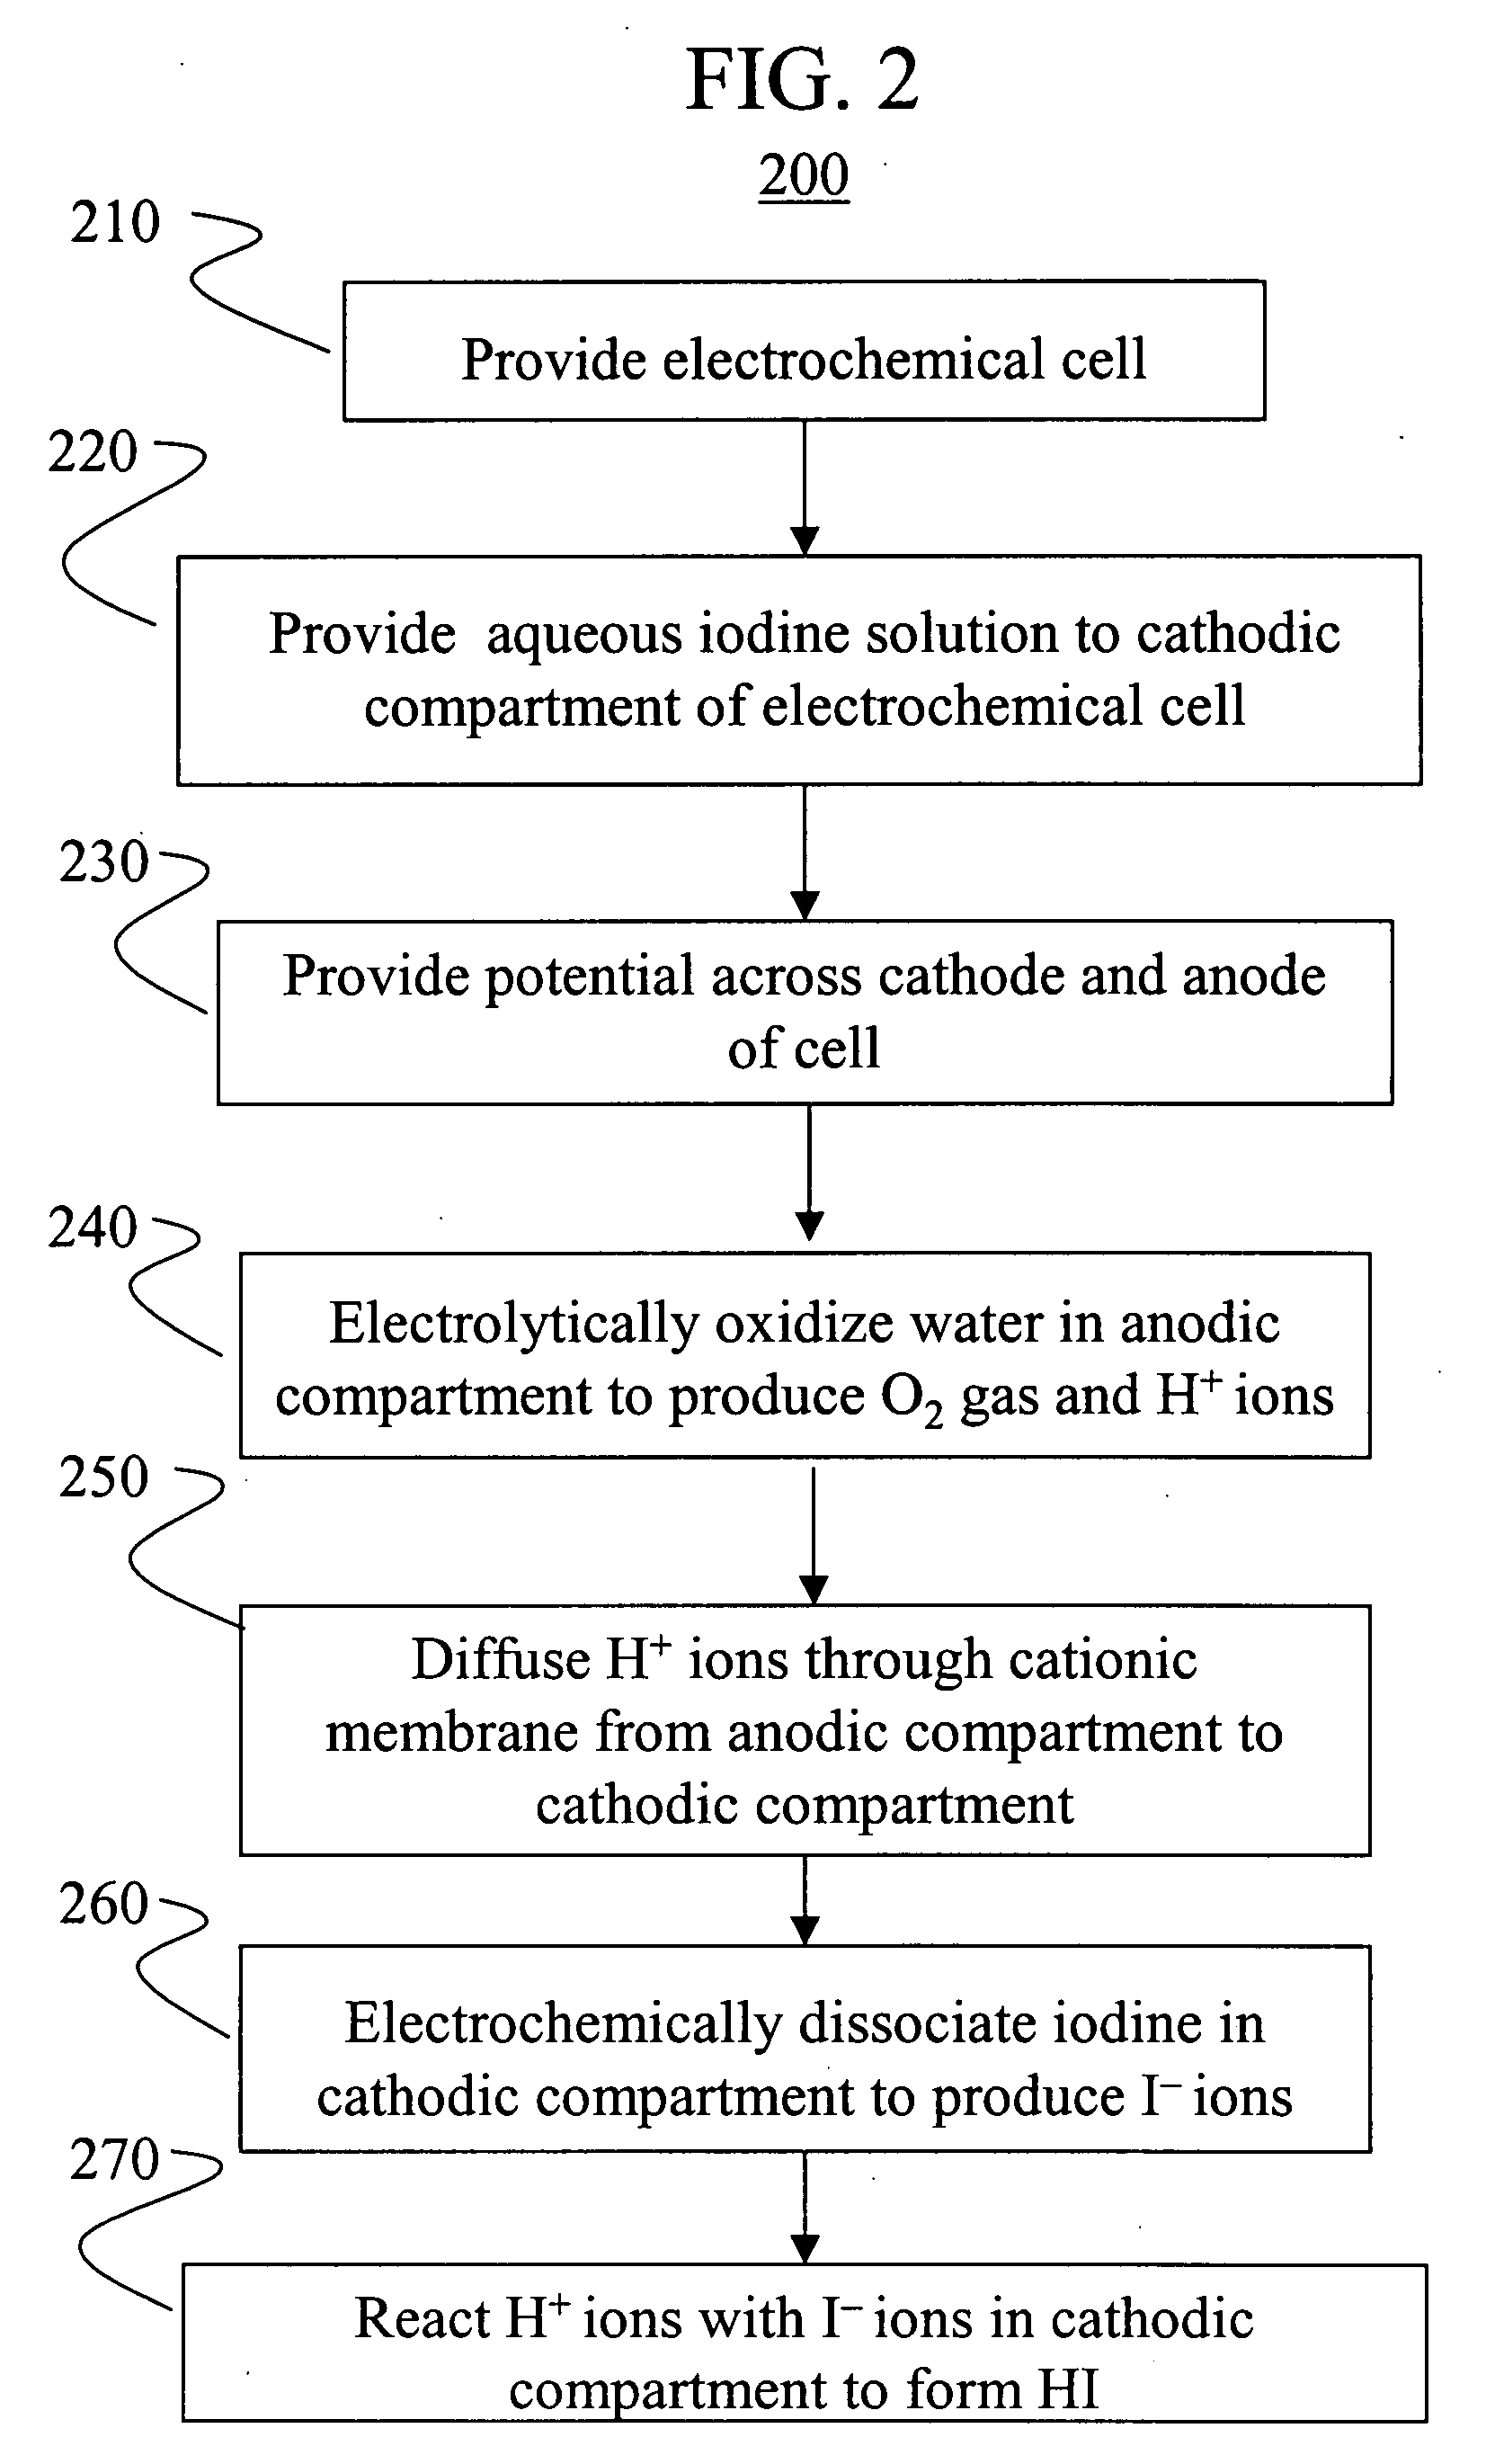 Electrochemical conversion of polyalcohols to hydrocarbons